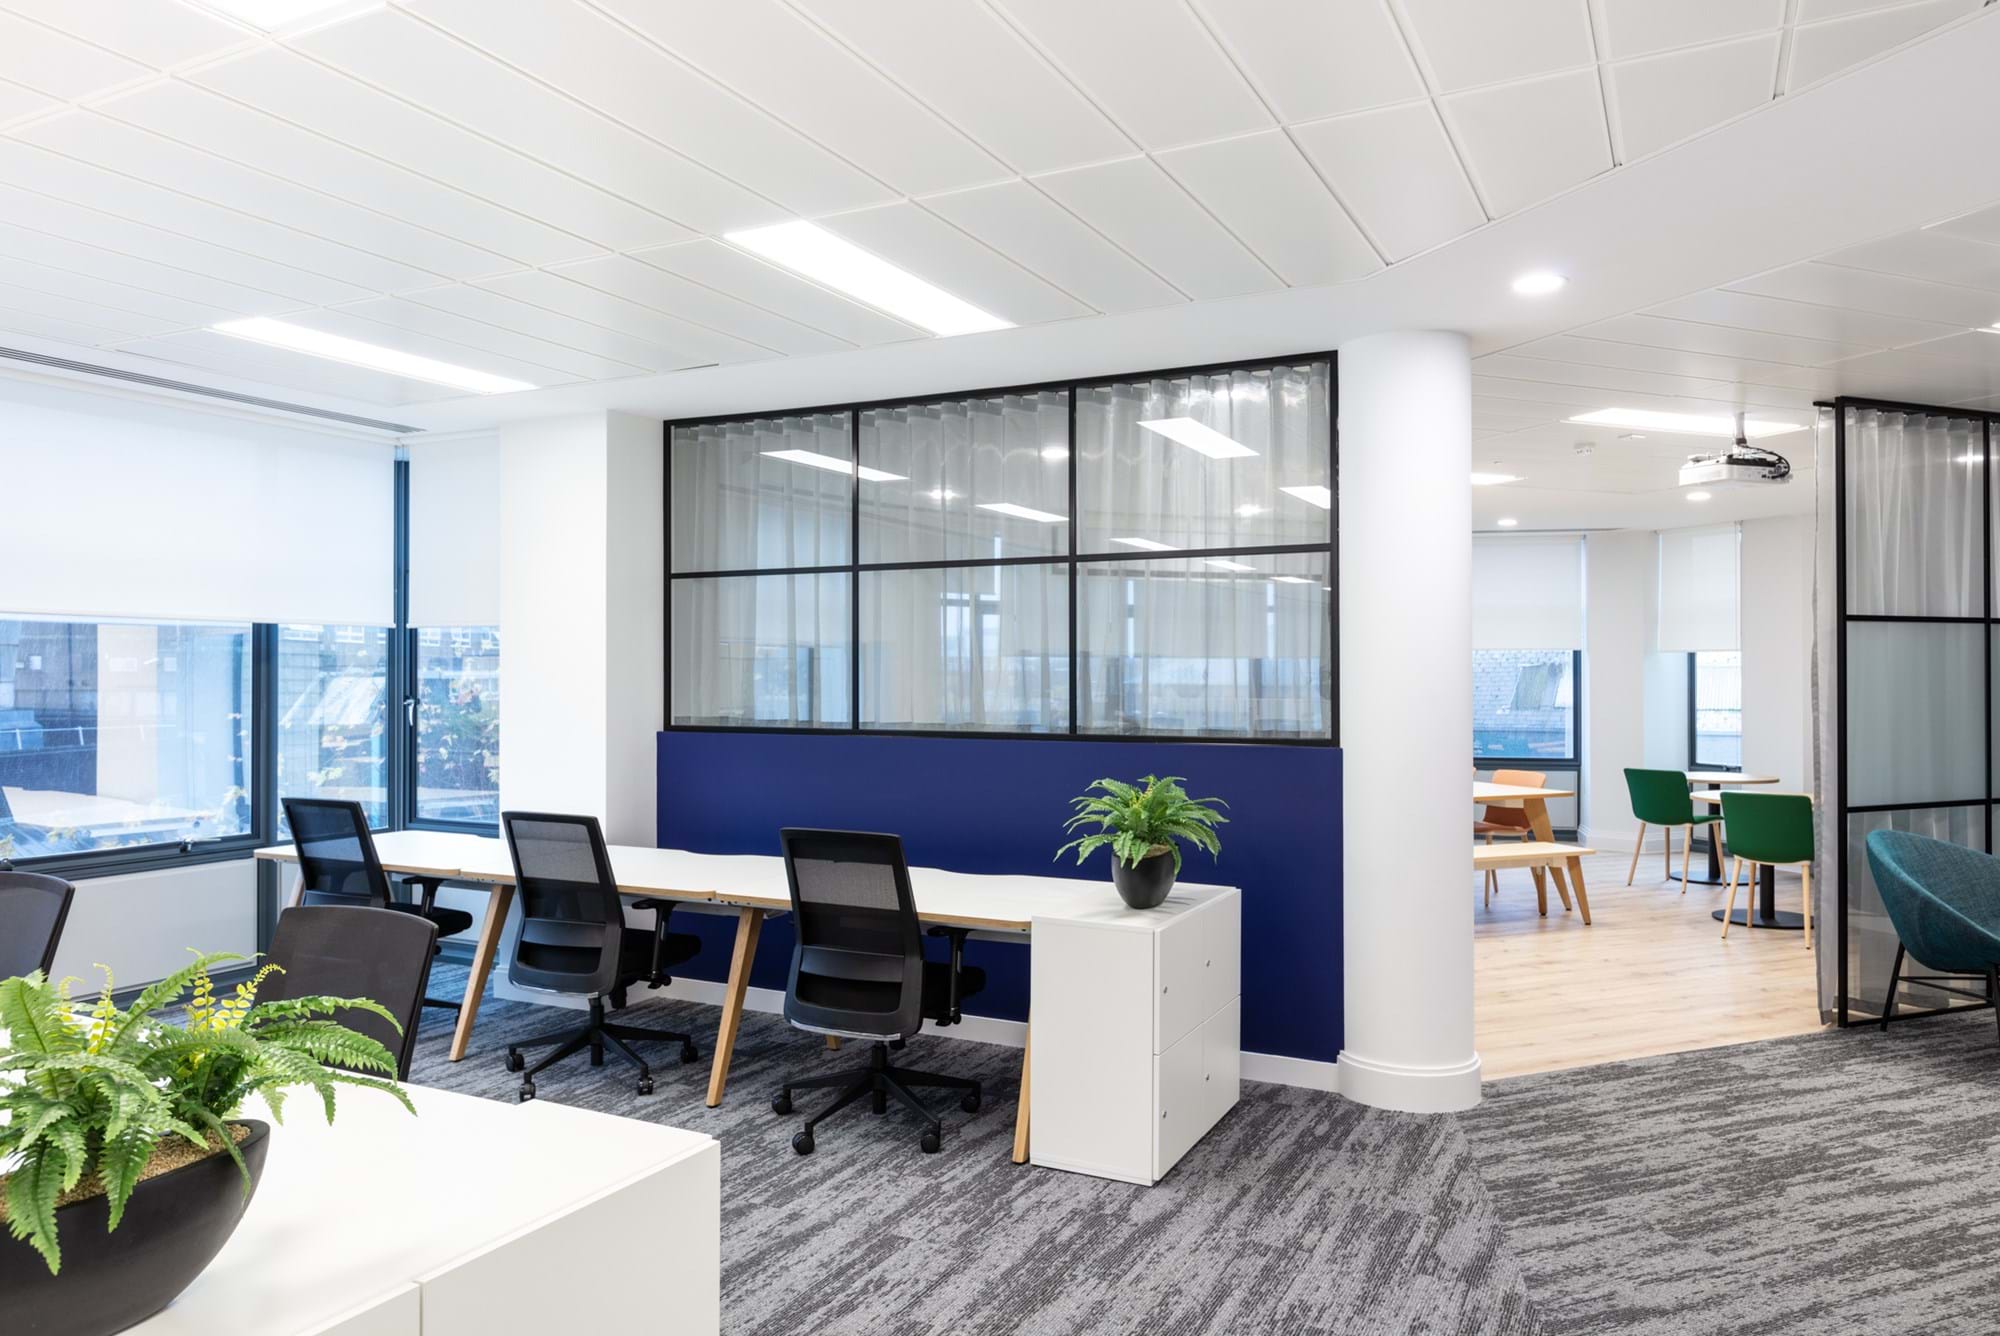 Modus Workspace office design, fit out and refurbishment - Pivot - Guildford - Pivot_Guildford_161220-13.jpg